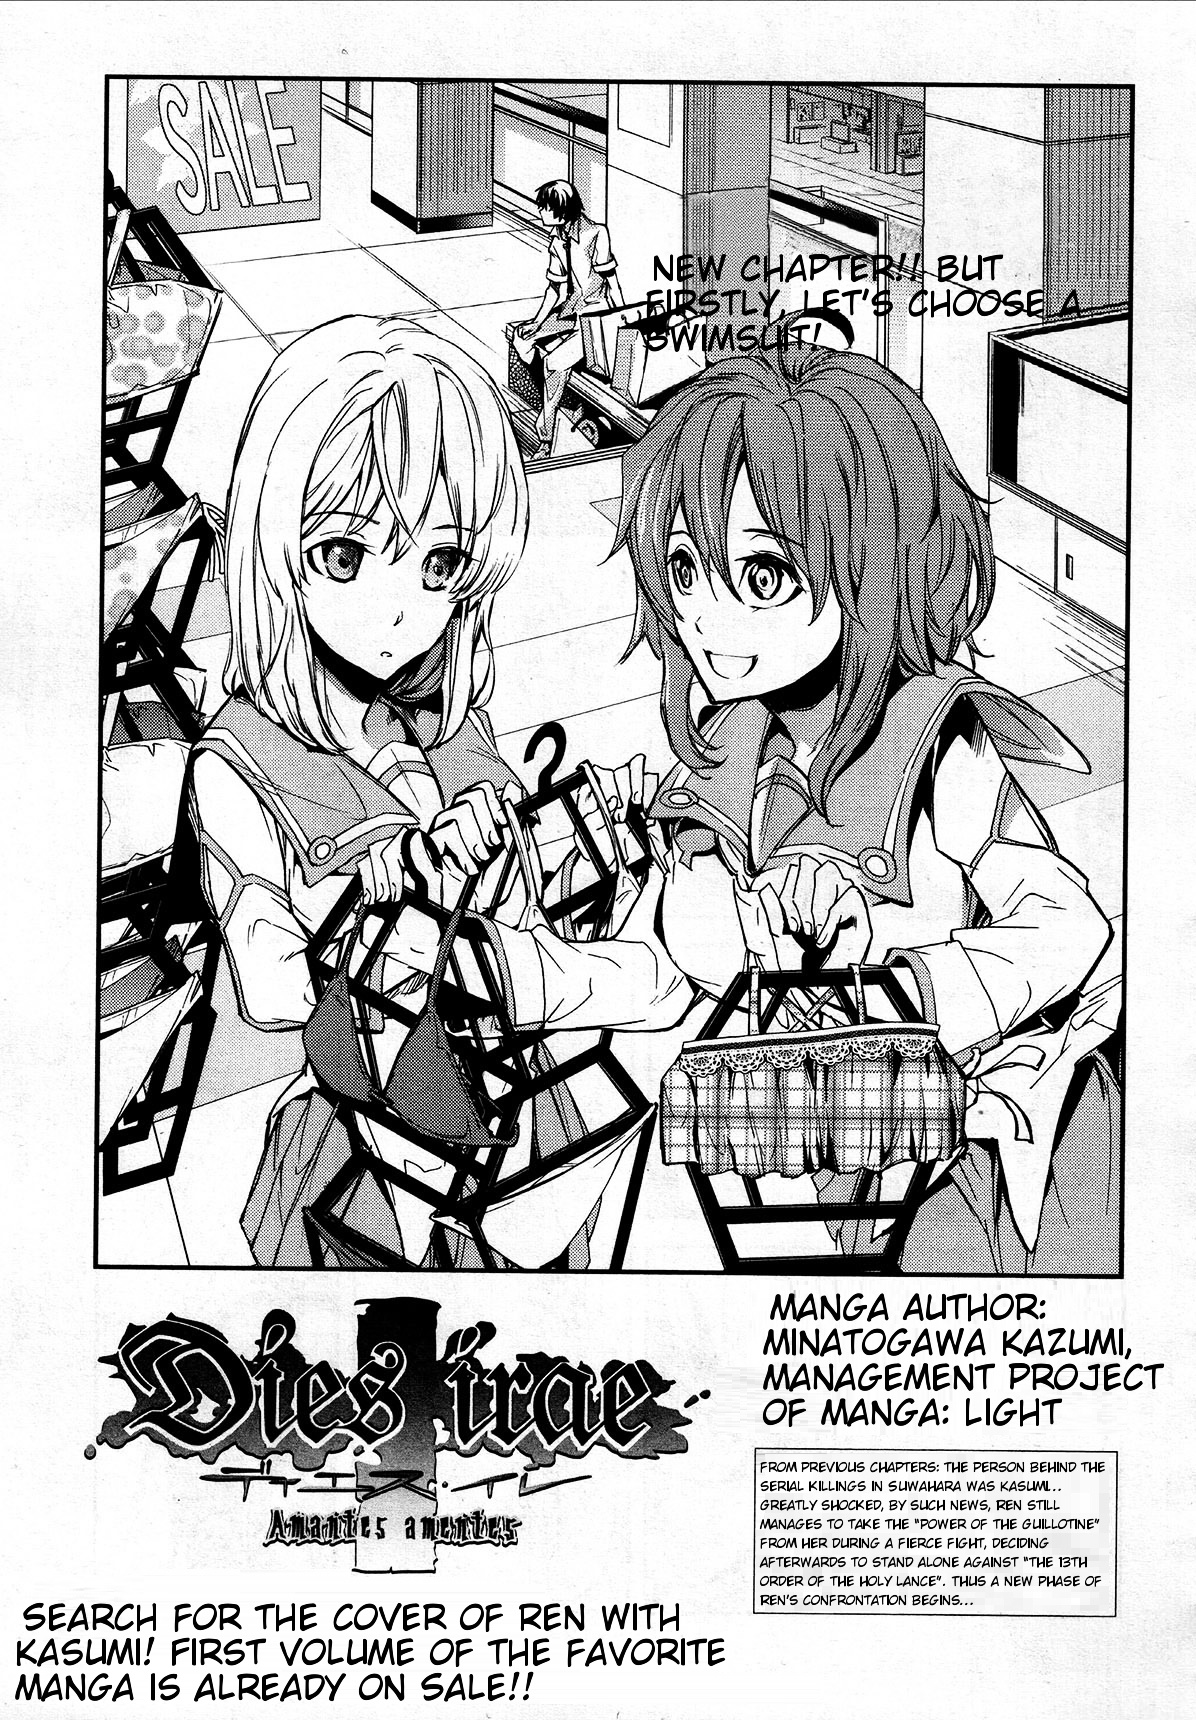 Dies Irae - Amantes Amentes Chapter 7 #1